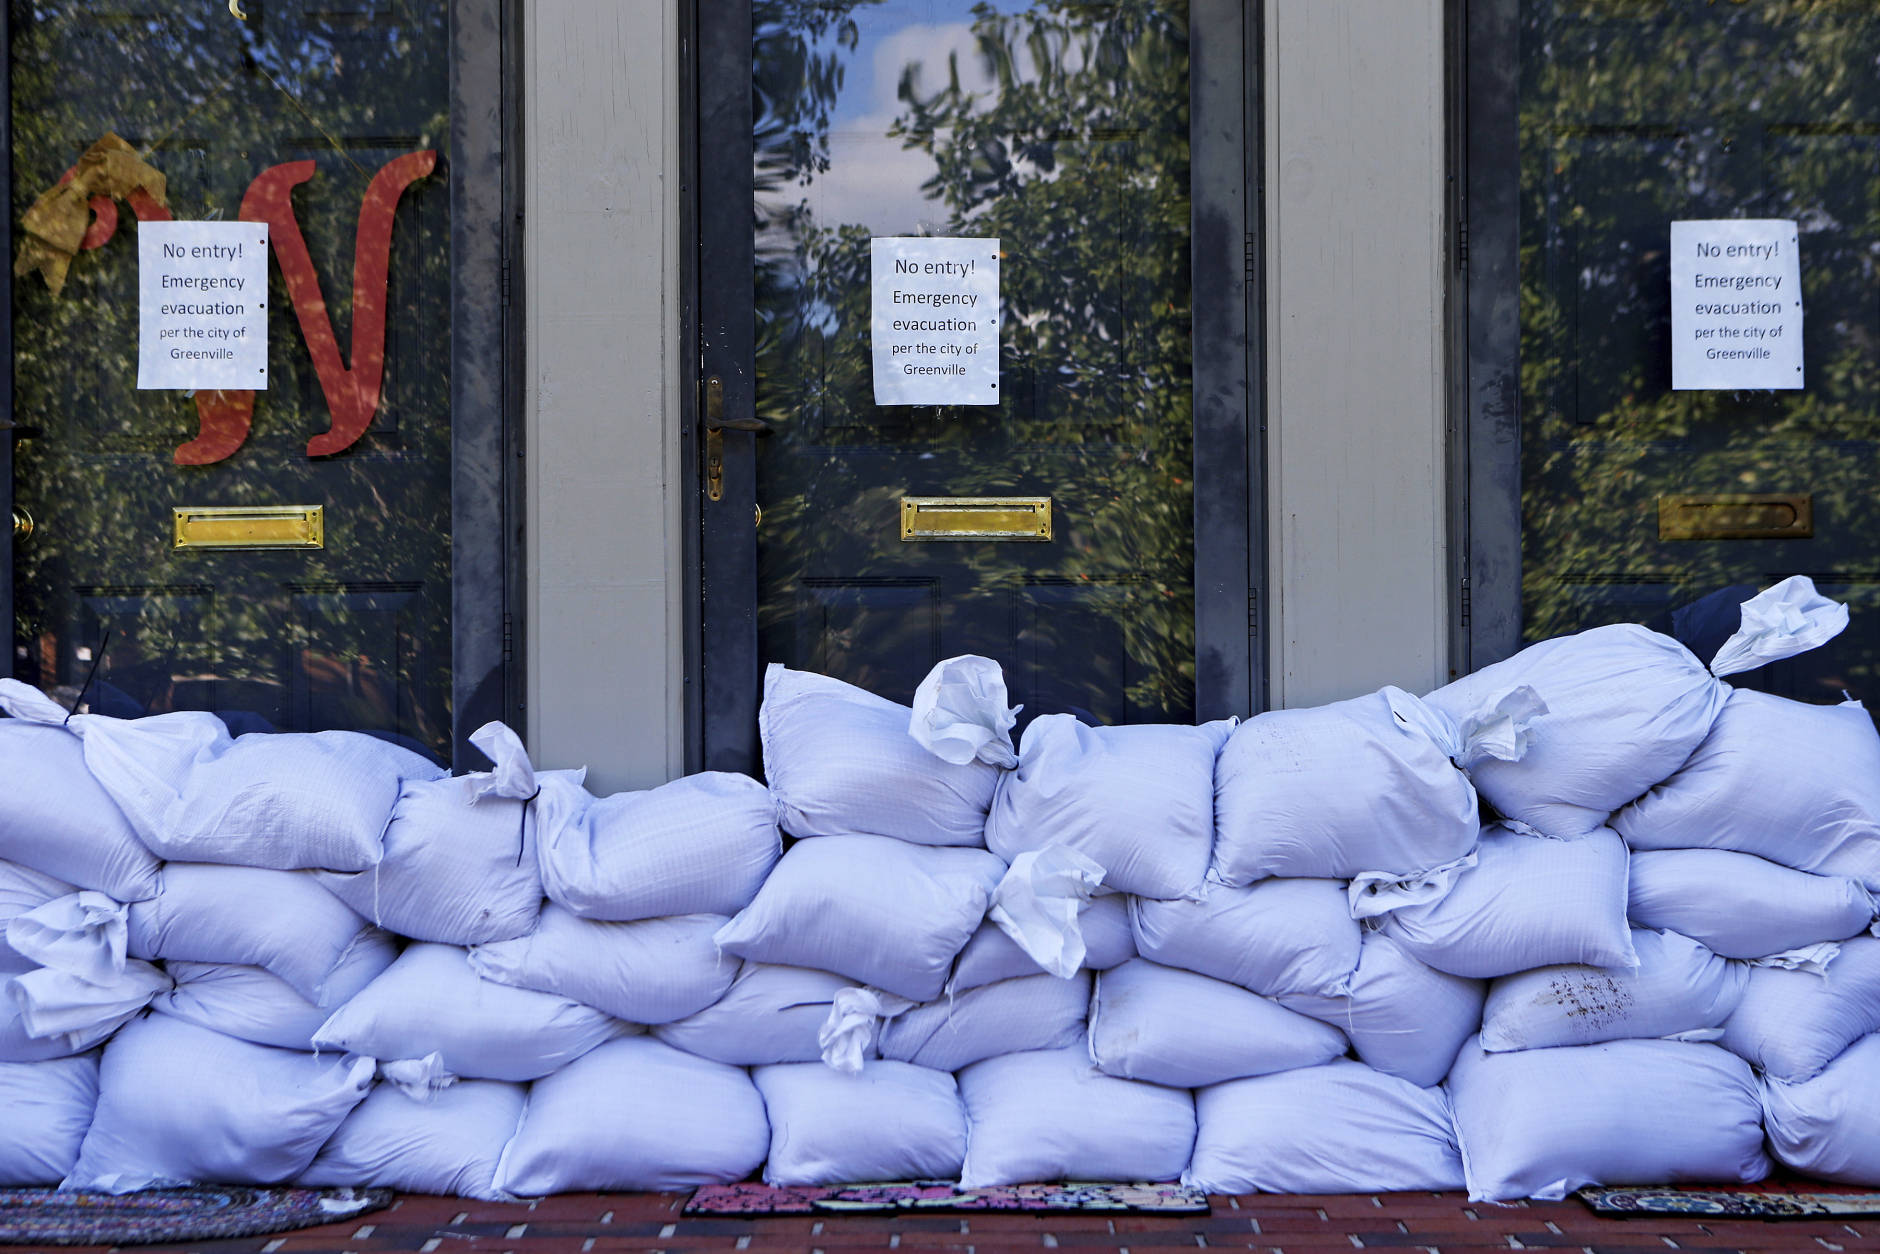 Sandbags and no entry signs are seen in front of apartments located near the Tar River as floodwaters associated with Hurricane Matthew continue to rise on Wednesday, Oct. 12, 2016, in Greenville, N.C. (AP Photo/Brian Blanco)